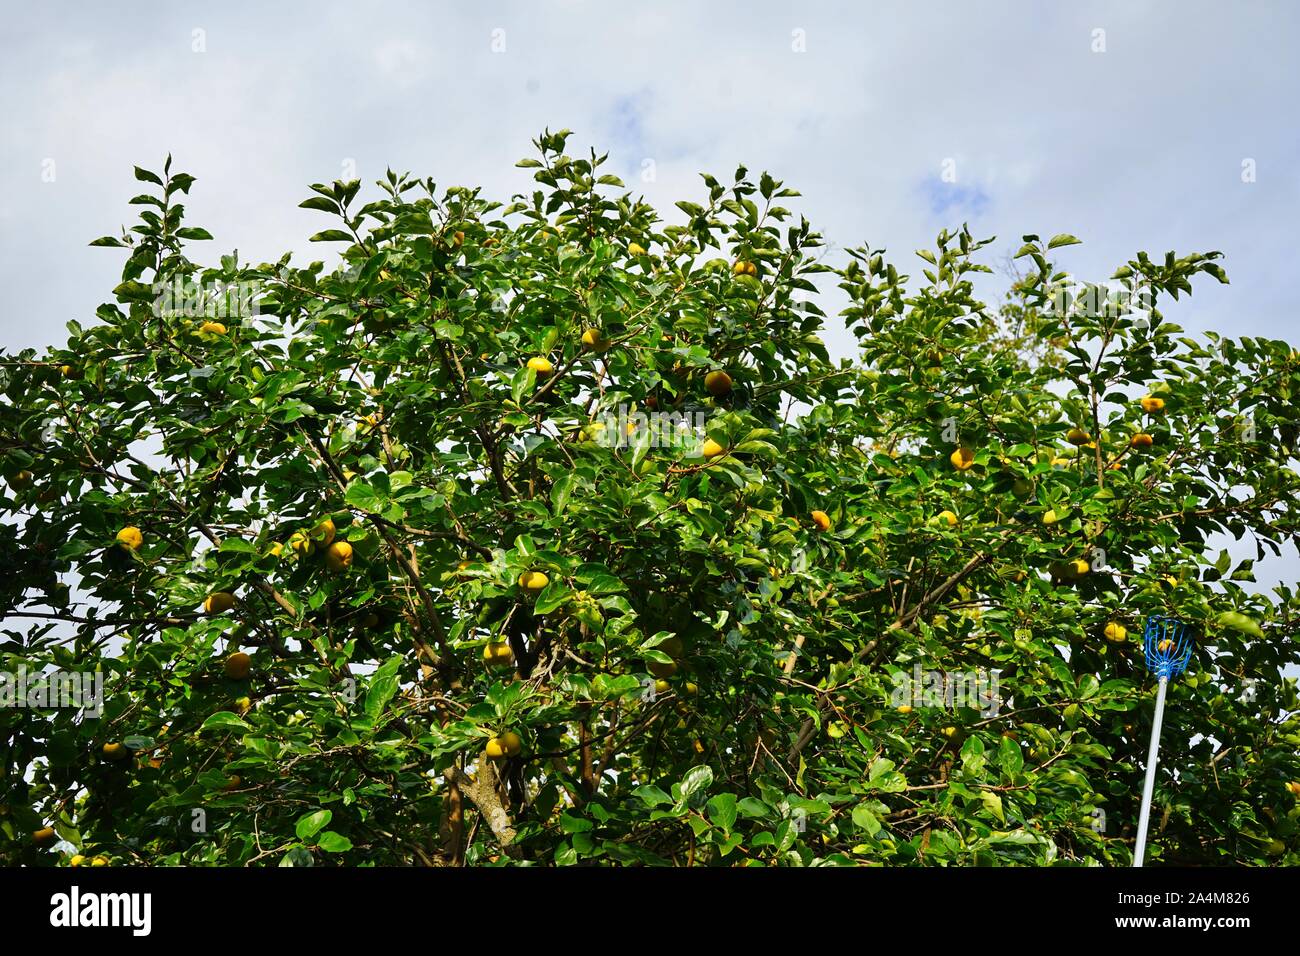 Picking orange persimmons from the tree with a fruit picker Stock Photo